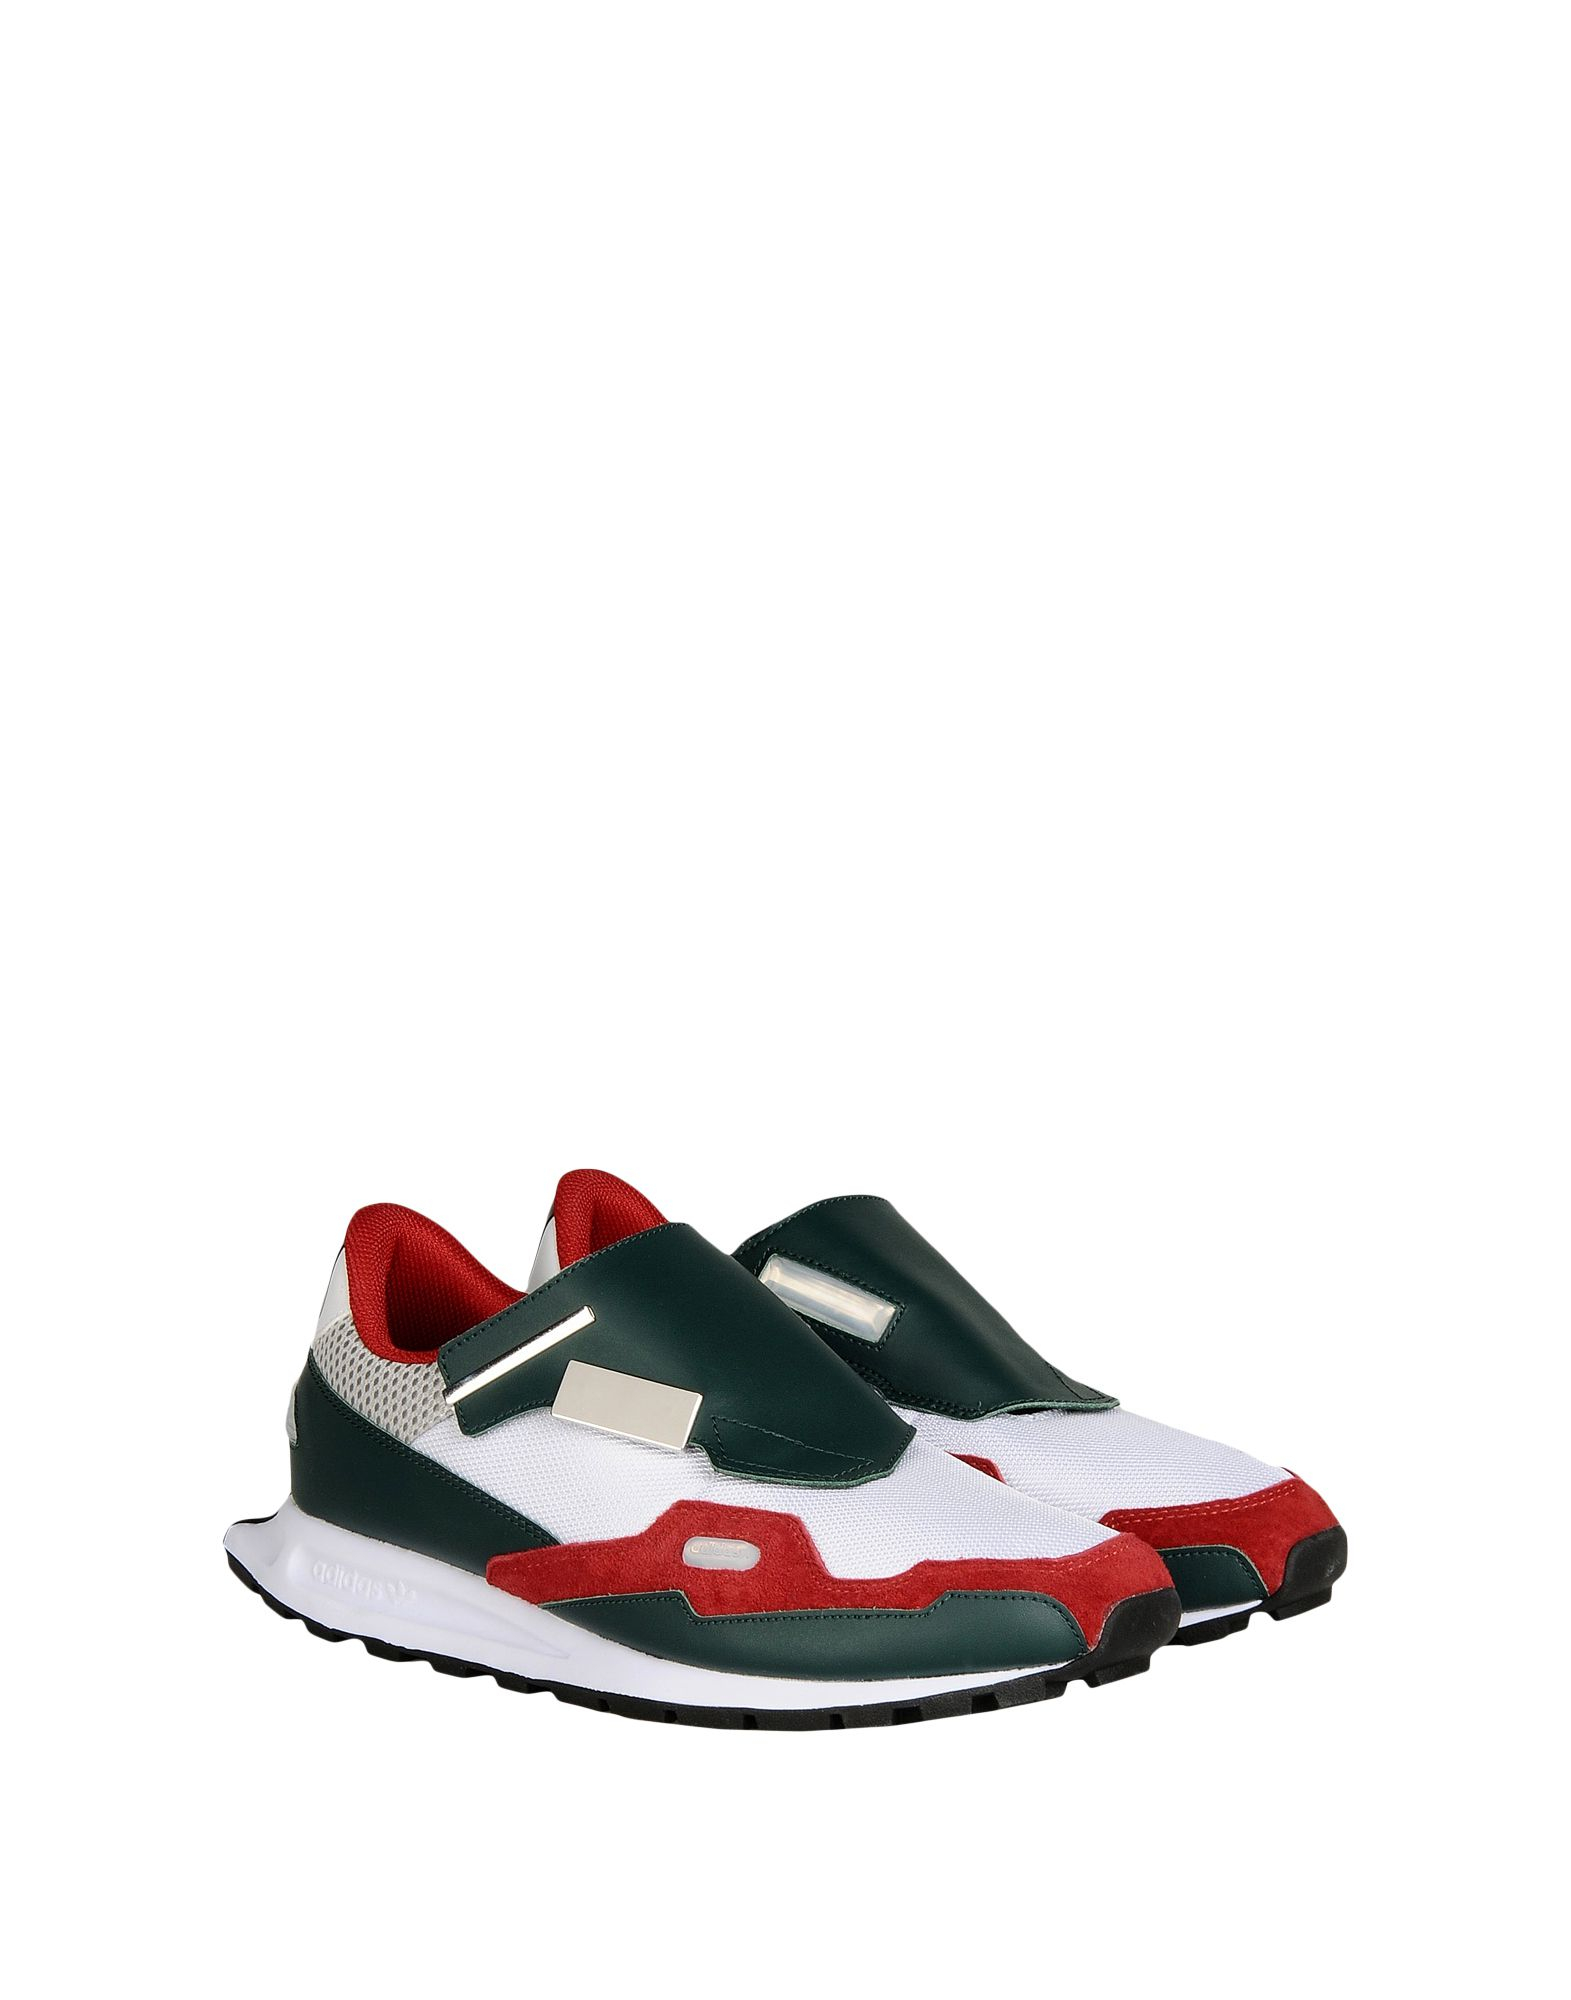 Raf Simons Lowtops Trainers in Green for Men - Lyst